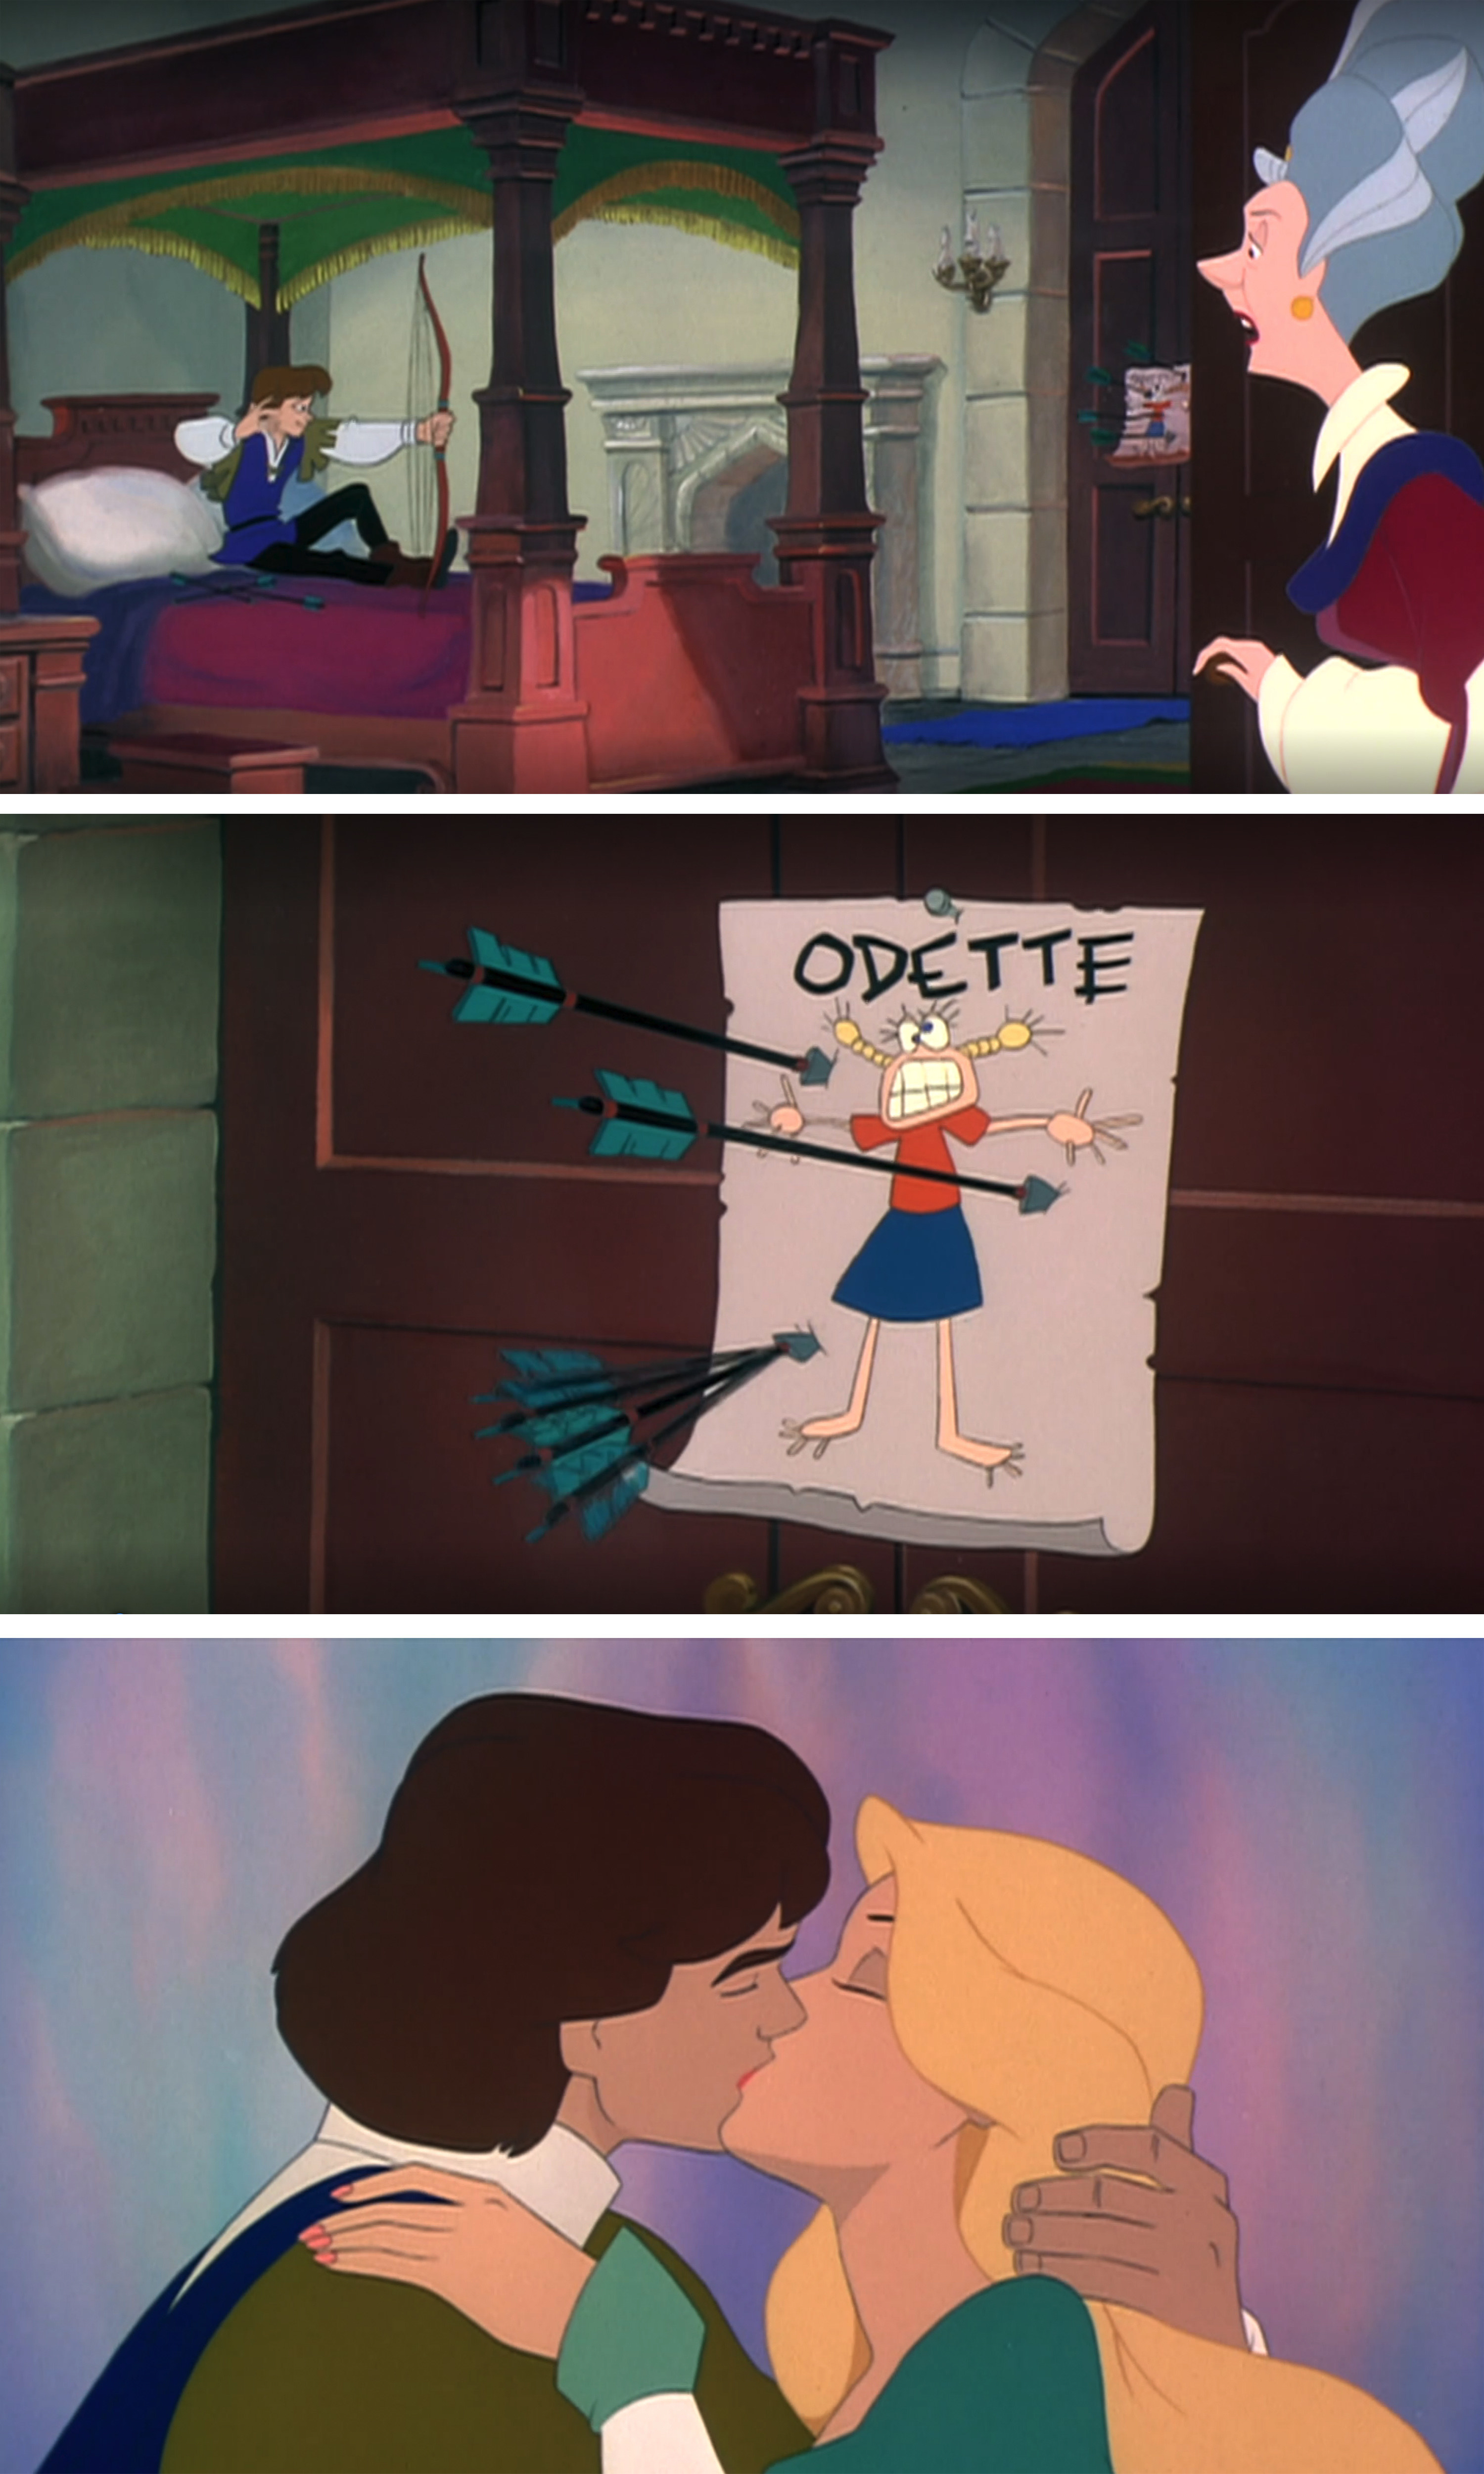 Top: Derek as a child aiming an arrow at a poster marked with a drawing of Odette; bottom: Derek and Odette kissing as adults